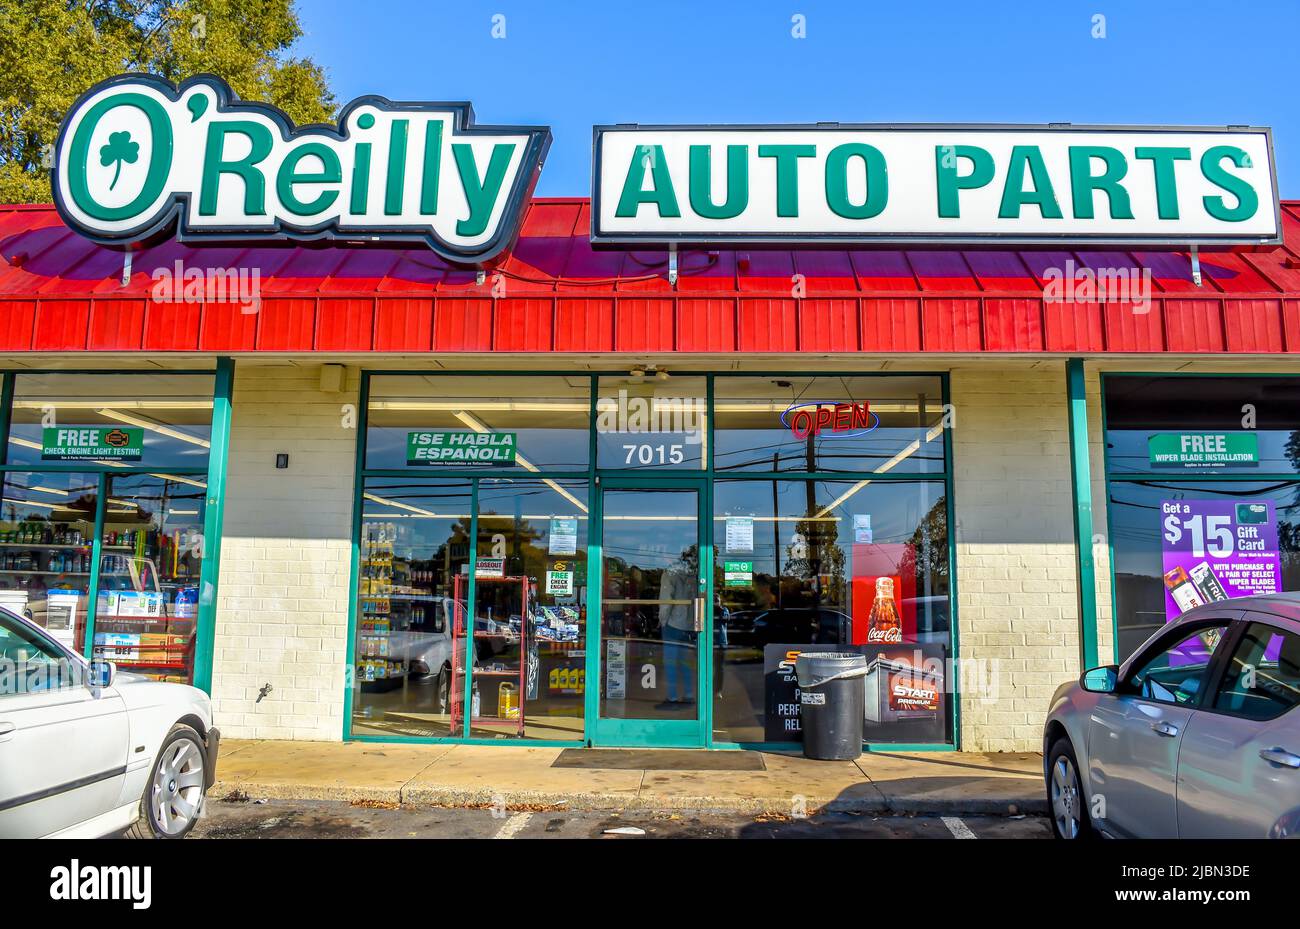 Oreilly Auto Parts Hi Res Stock Photography And Images Alamy